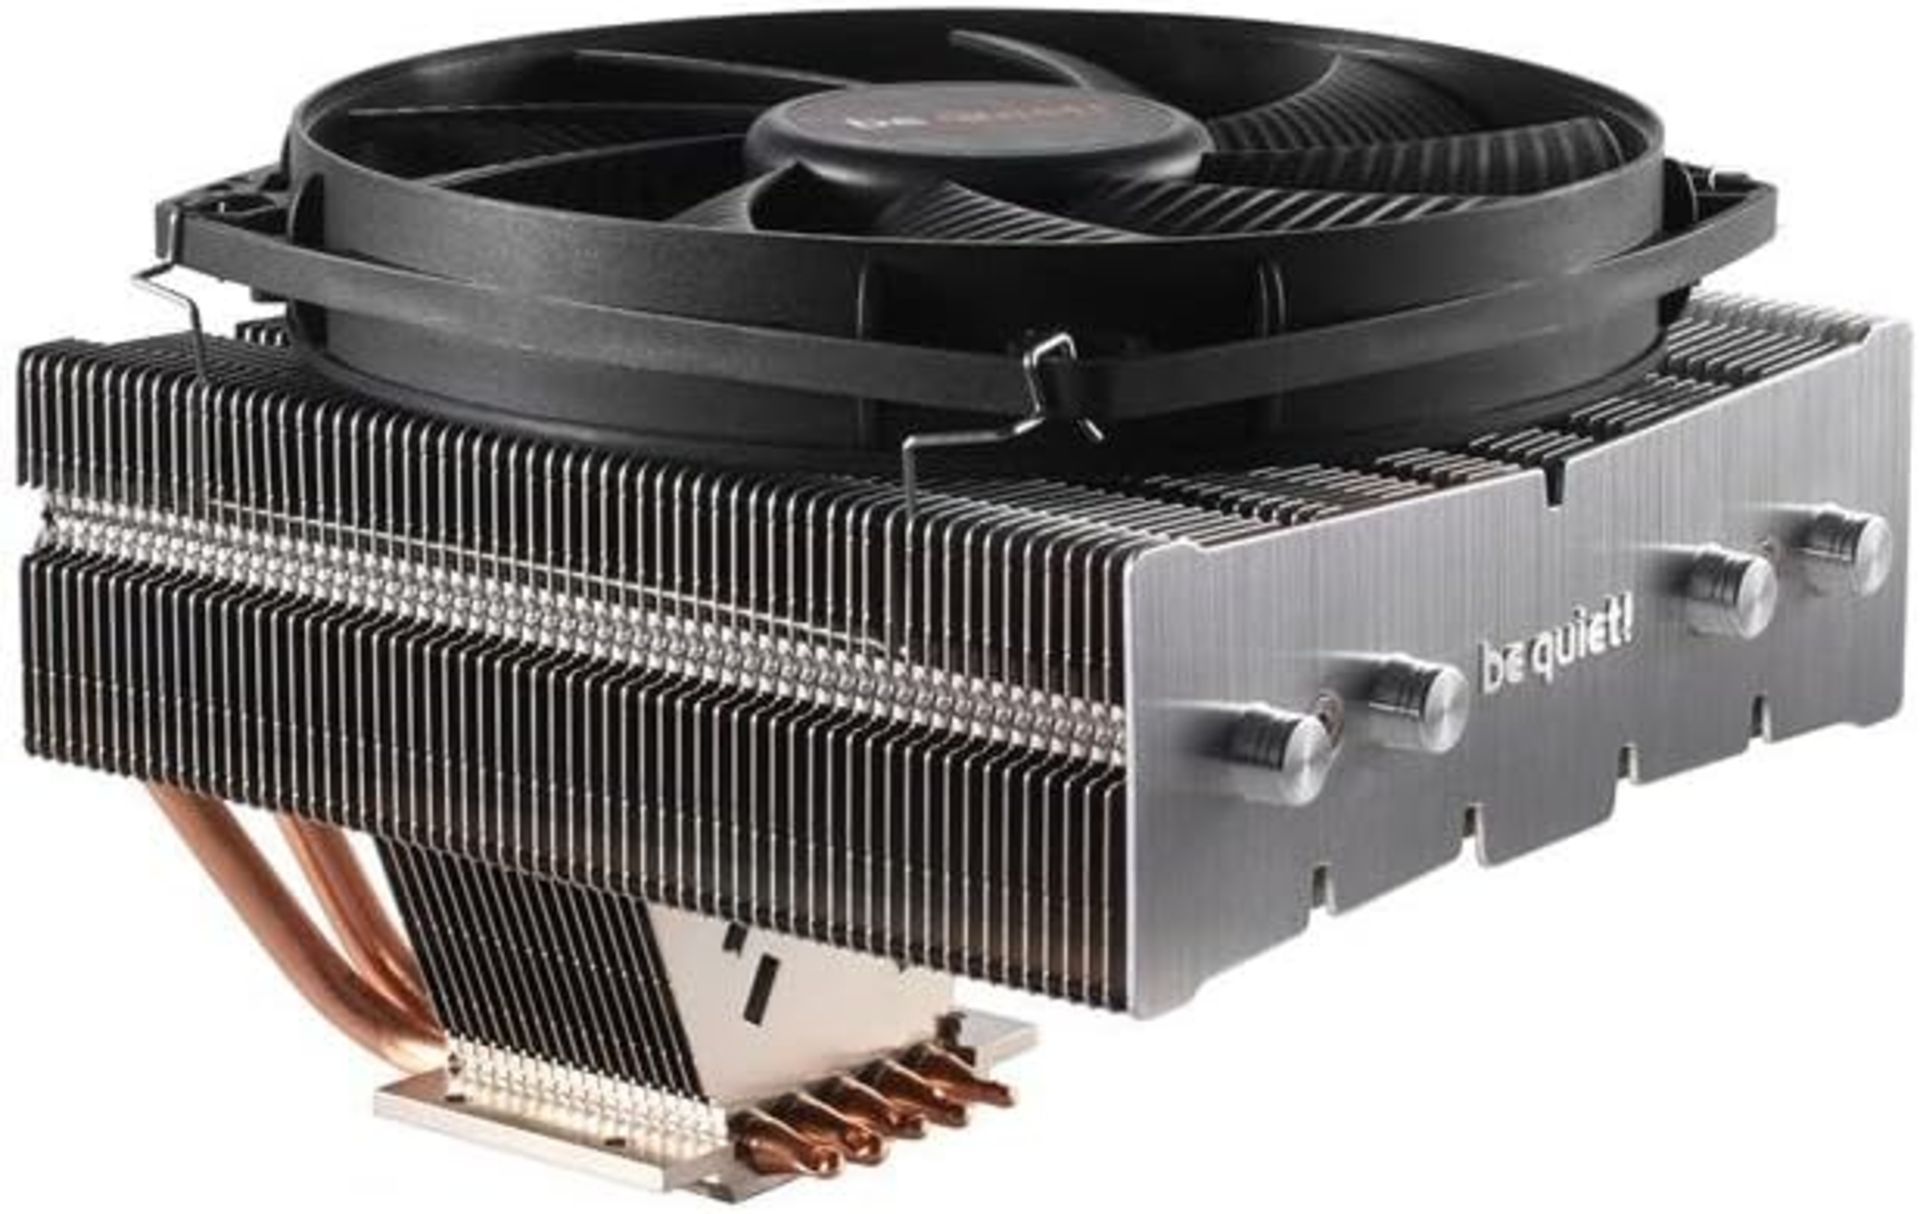 NEW & BOXED BE QUIET! Shadow Rock TF 2 CPU Cooler. RRP £59.99. Shadow Rock TF 2 is the perfect